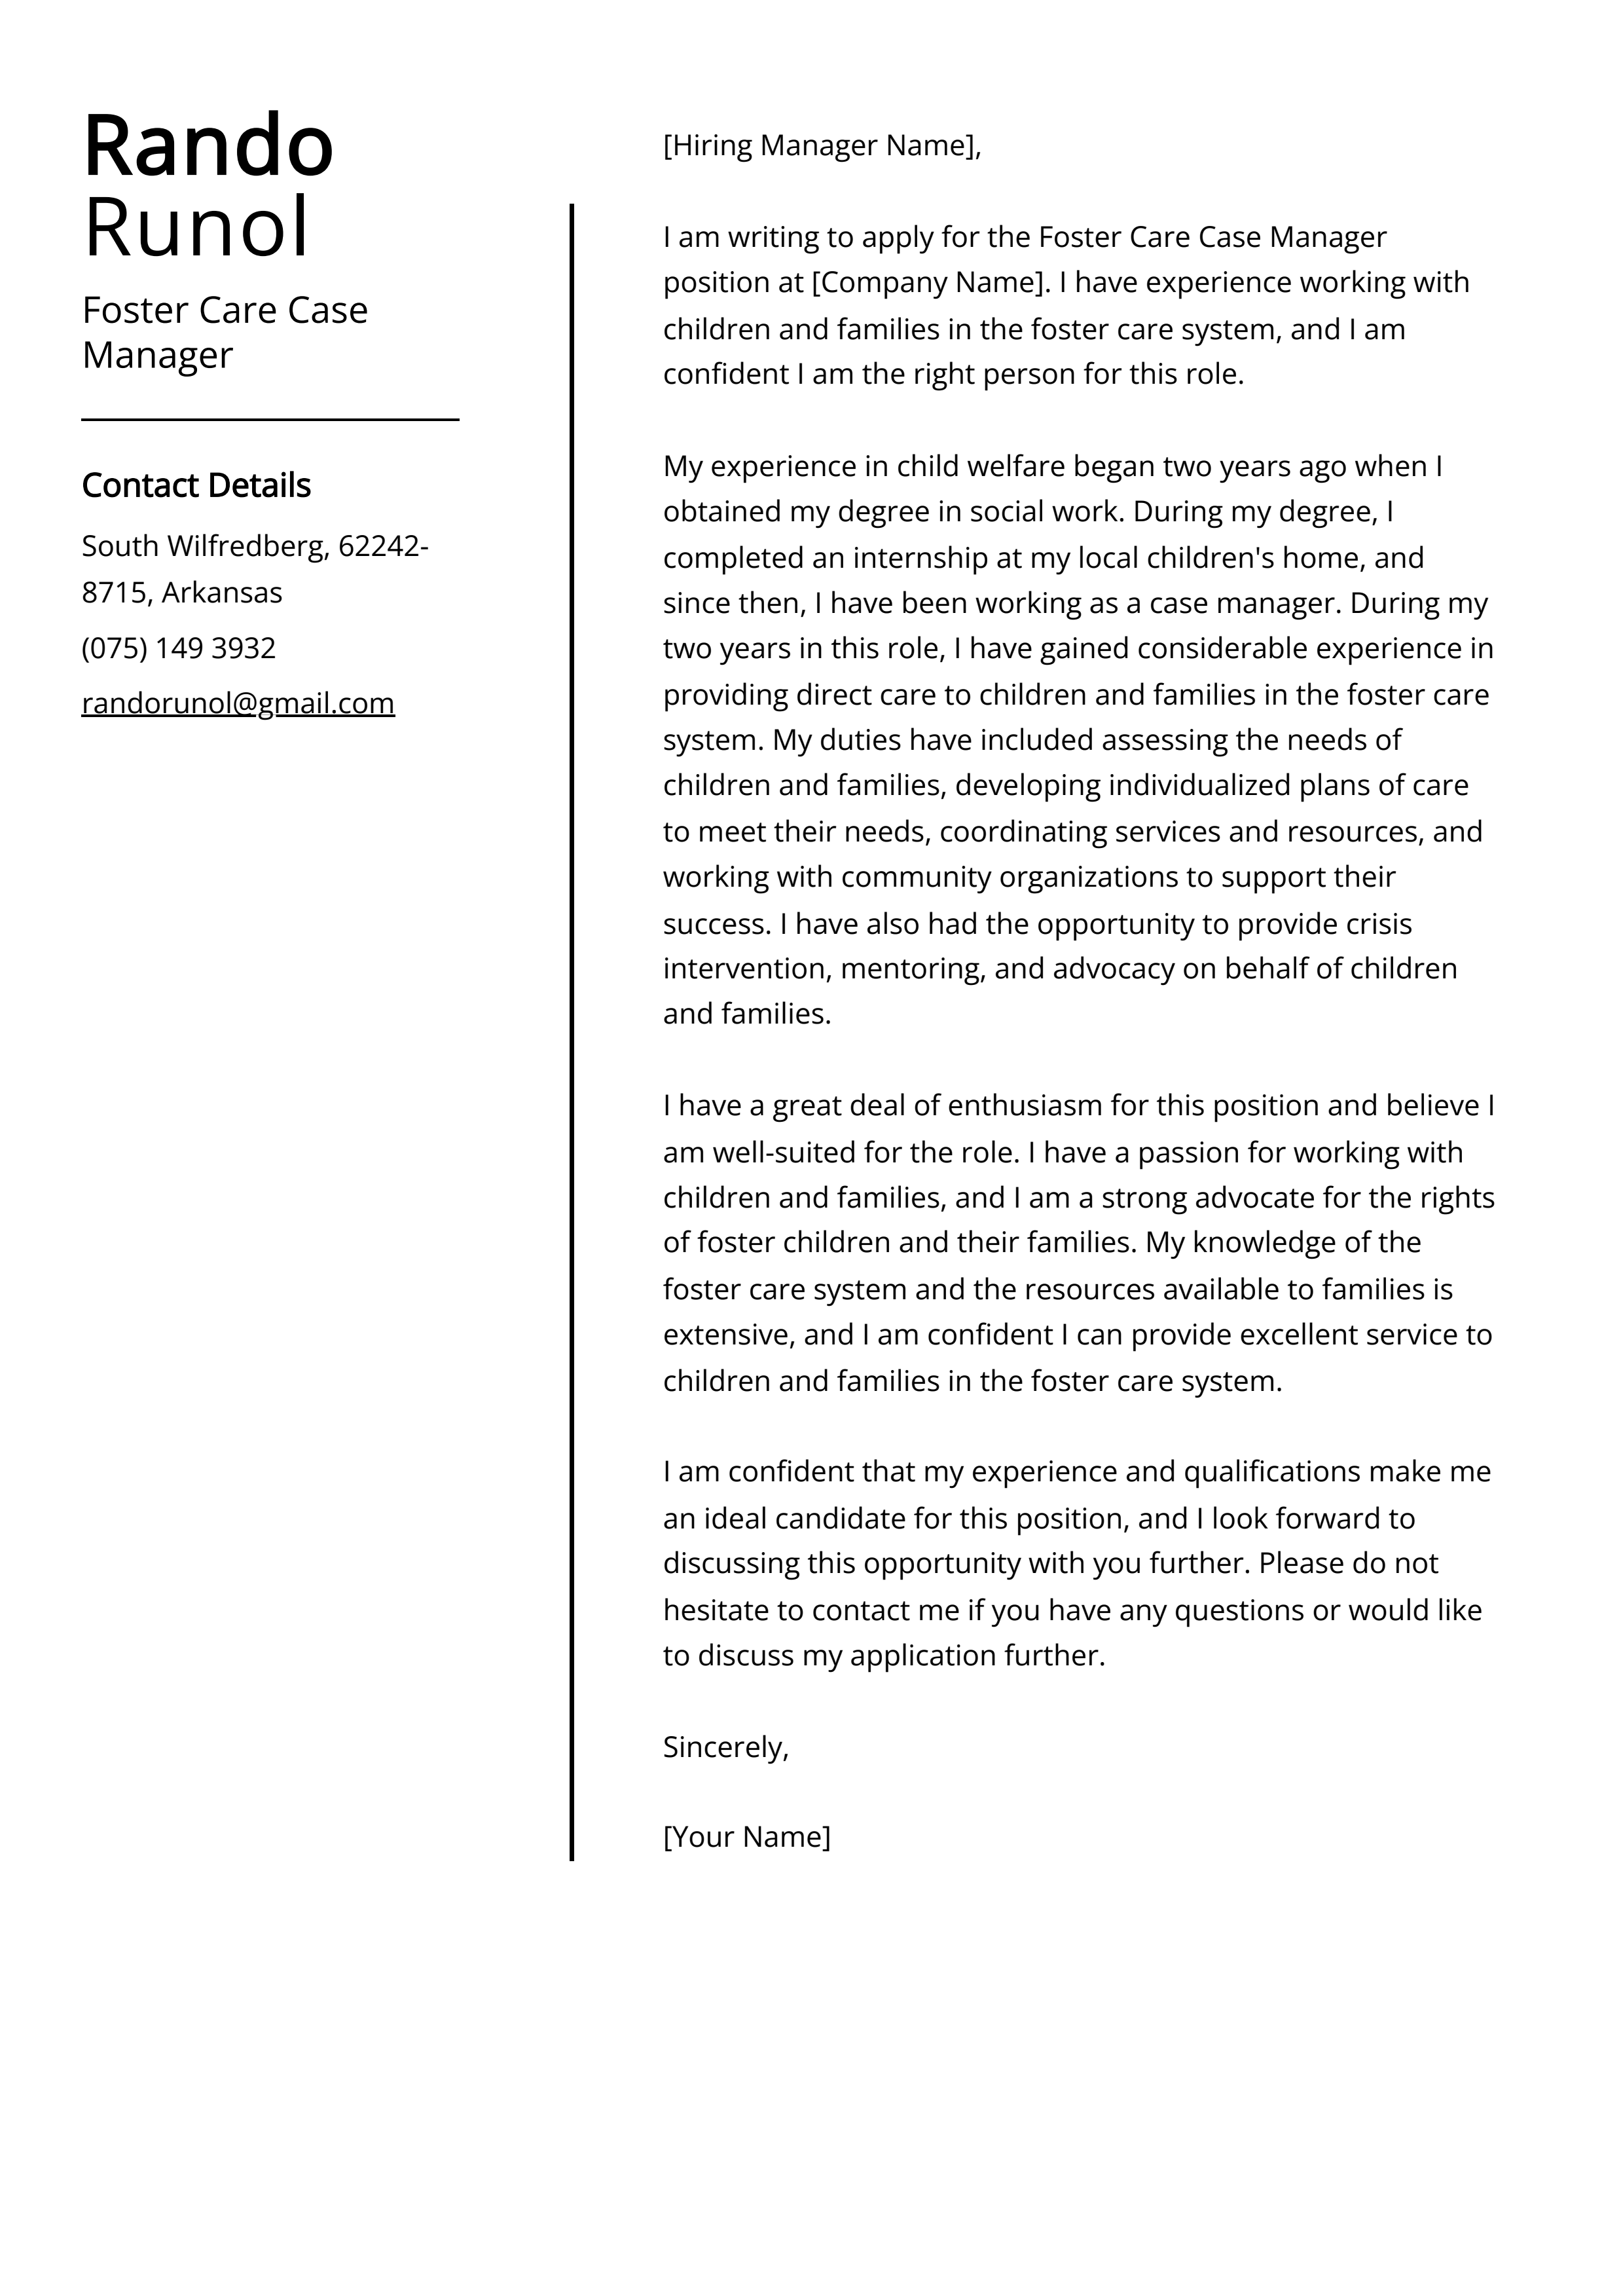 foster care case manager cover letter